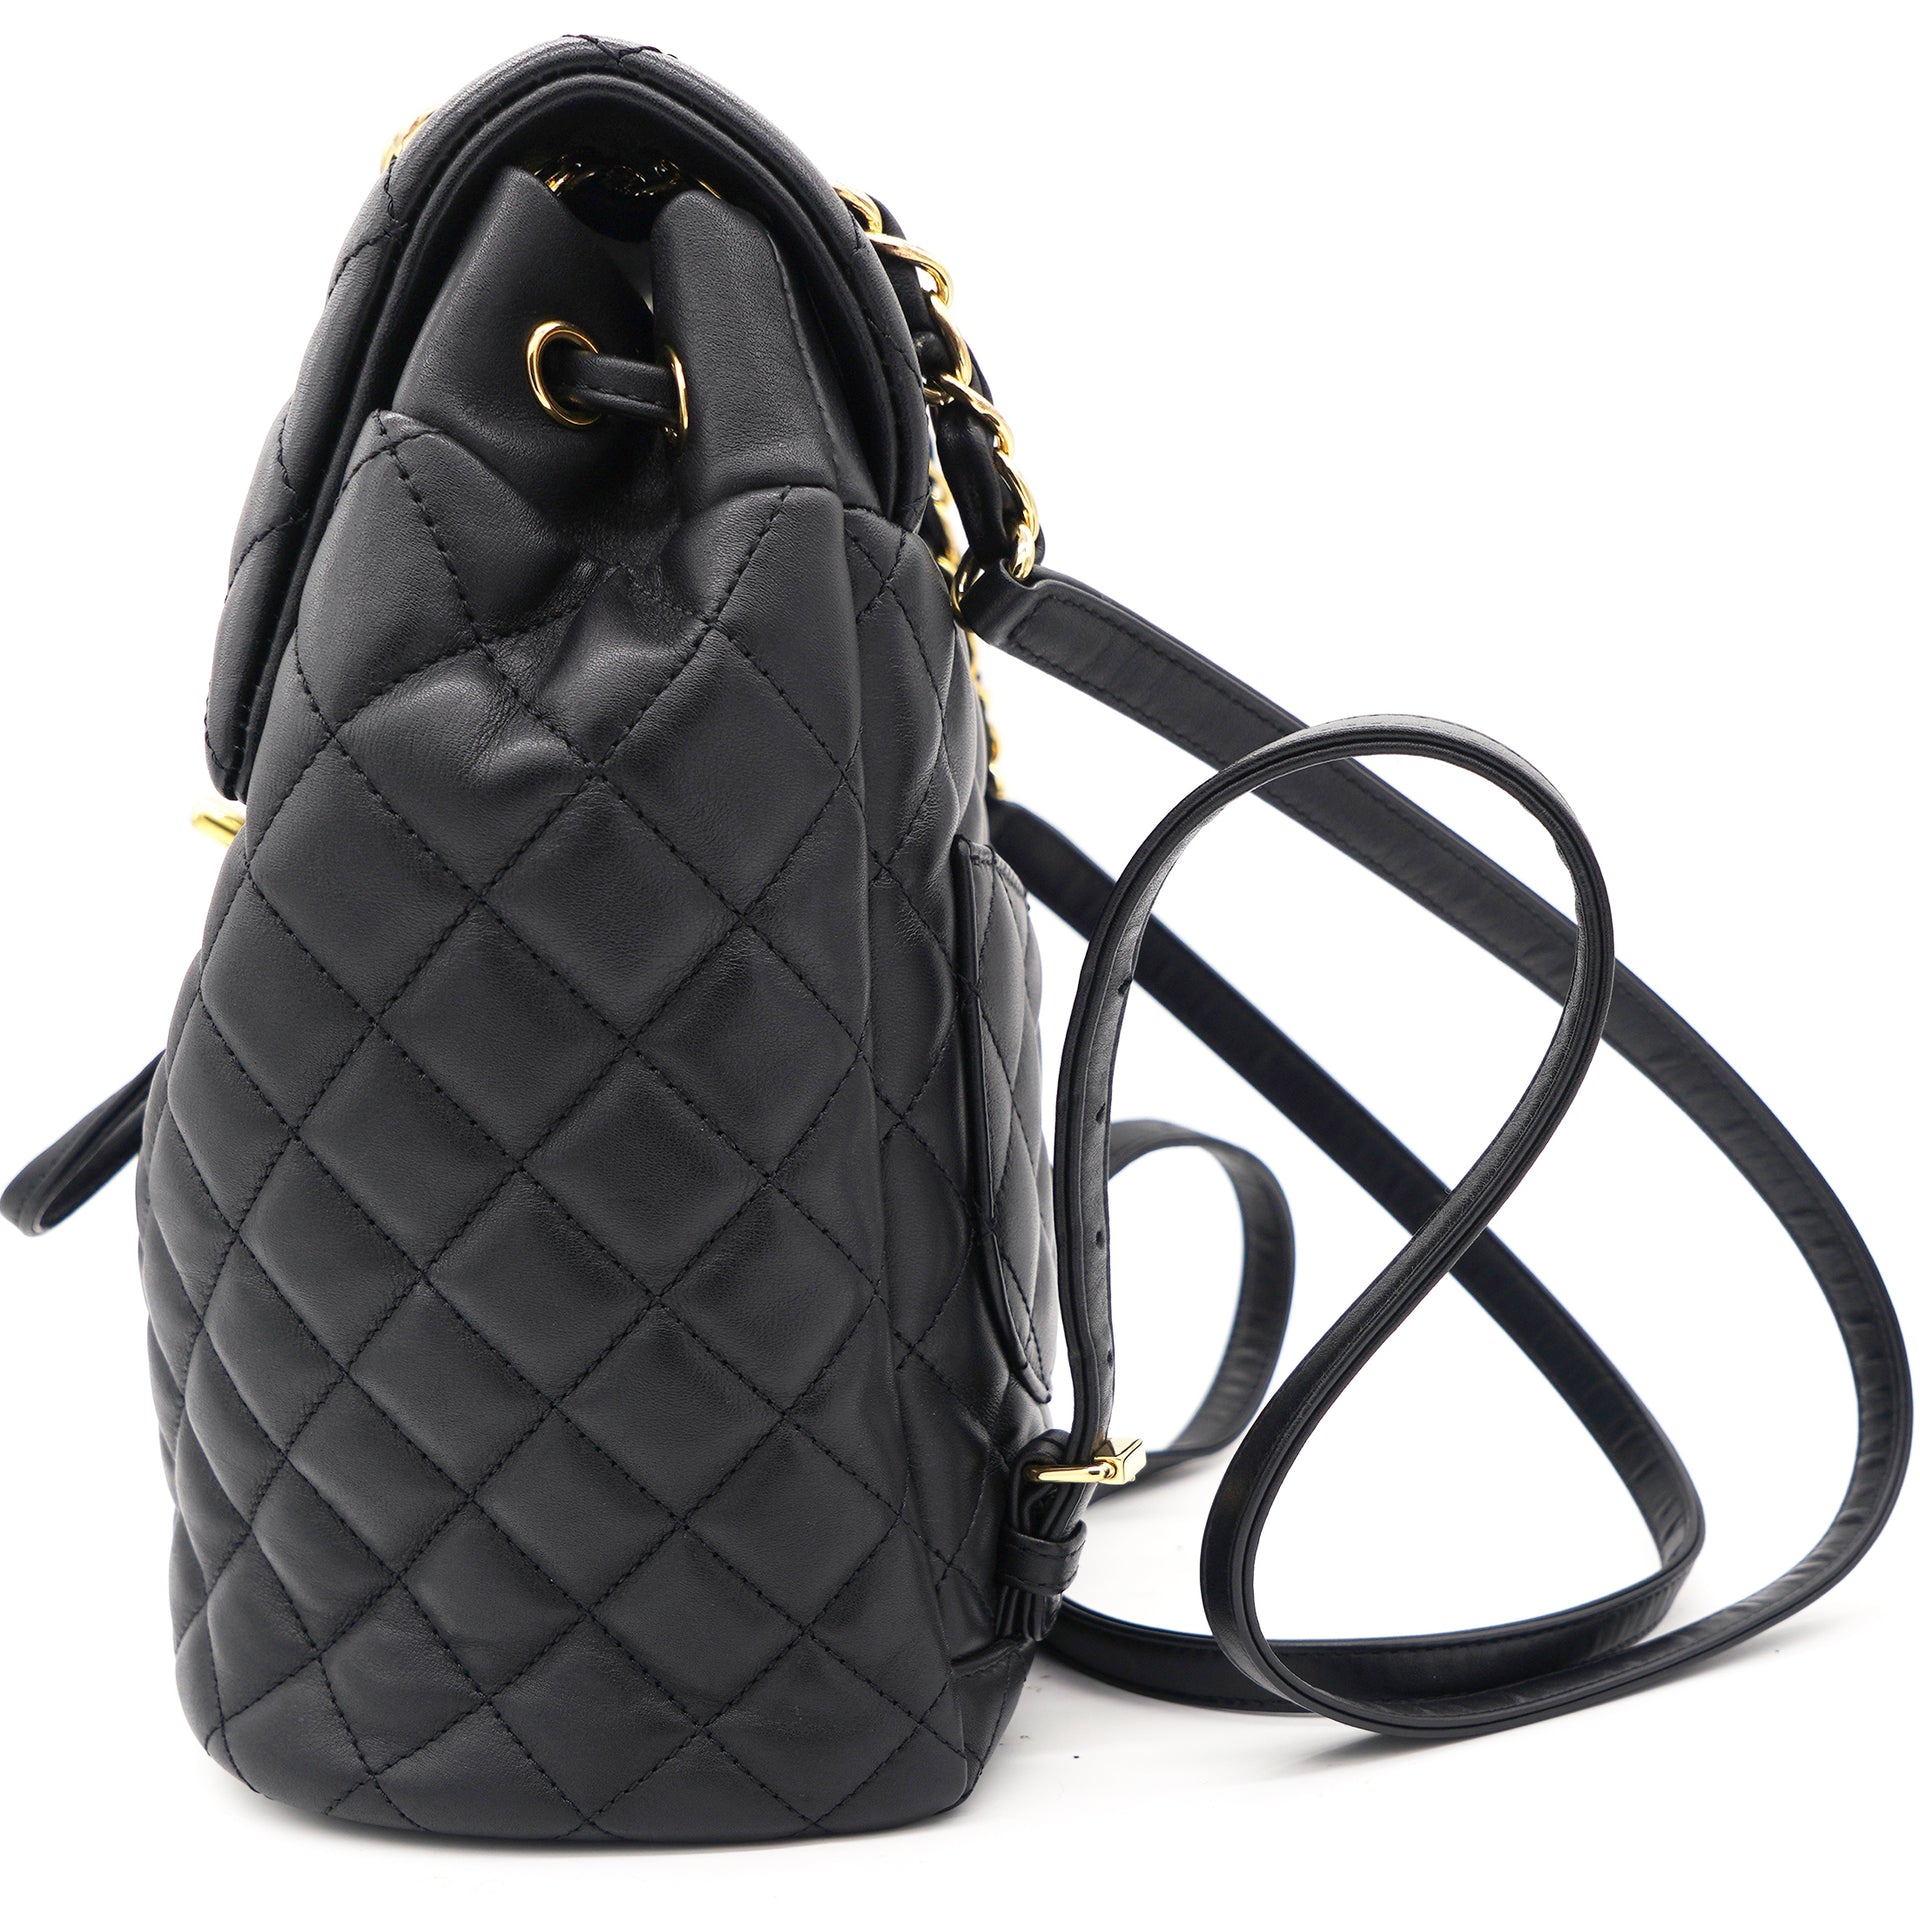 Unusual Chanel Square Quilted Black Leather Backpack Bag With Chain Straps